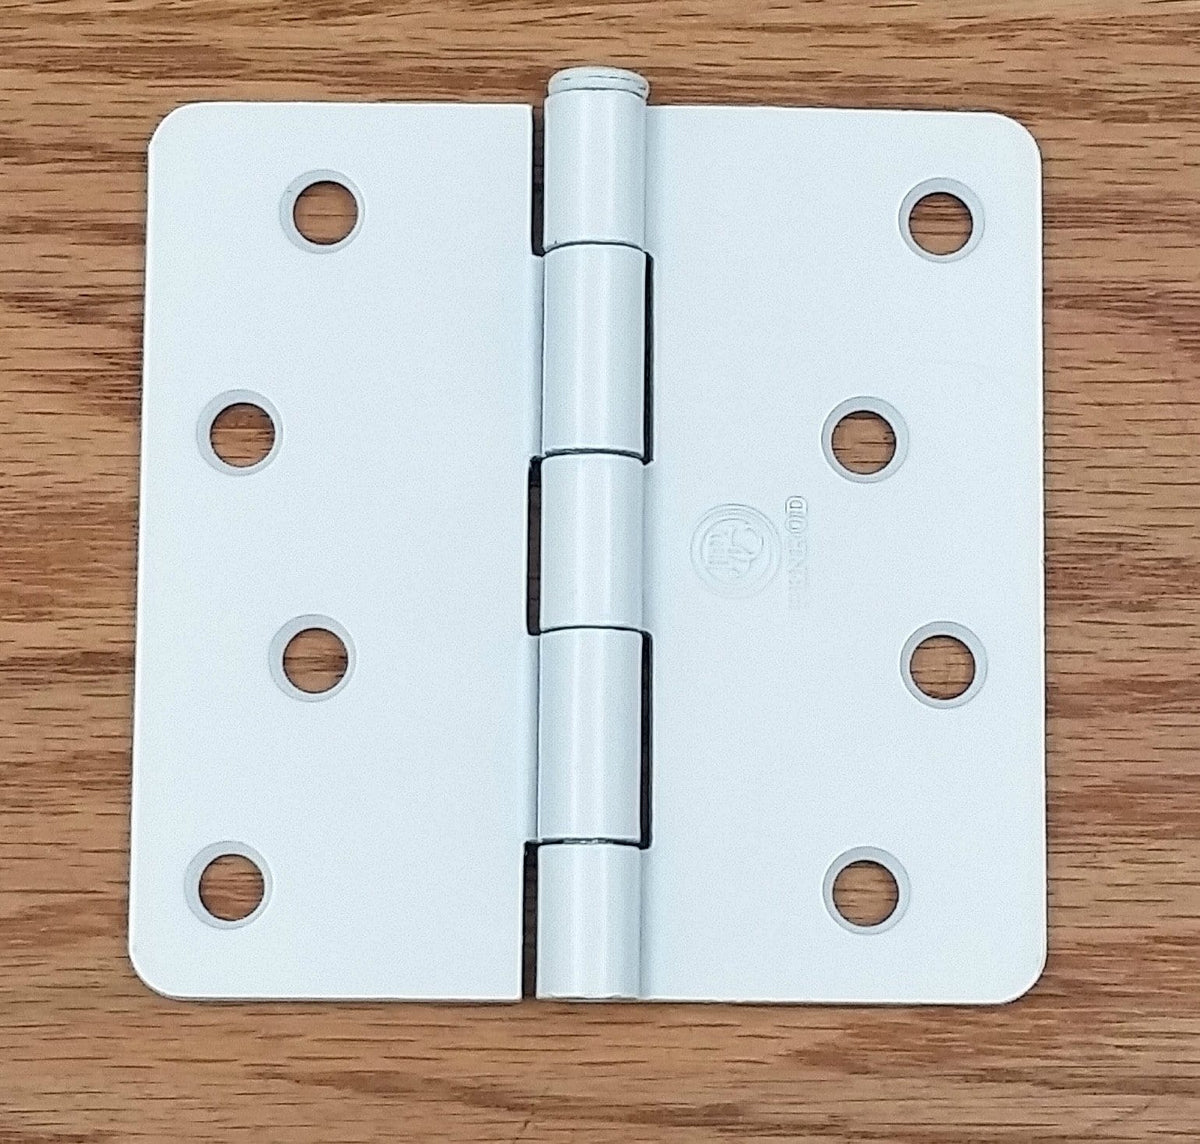 Residential Penrod Butt Hinges - 4 Inch With 1/4 Inch Radius Corner Plain Bearing- White Prime - 2 Pack